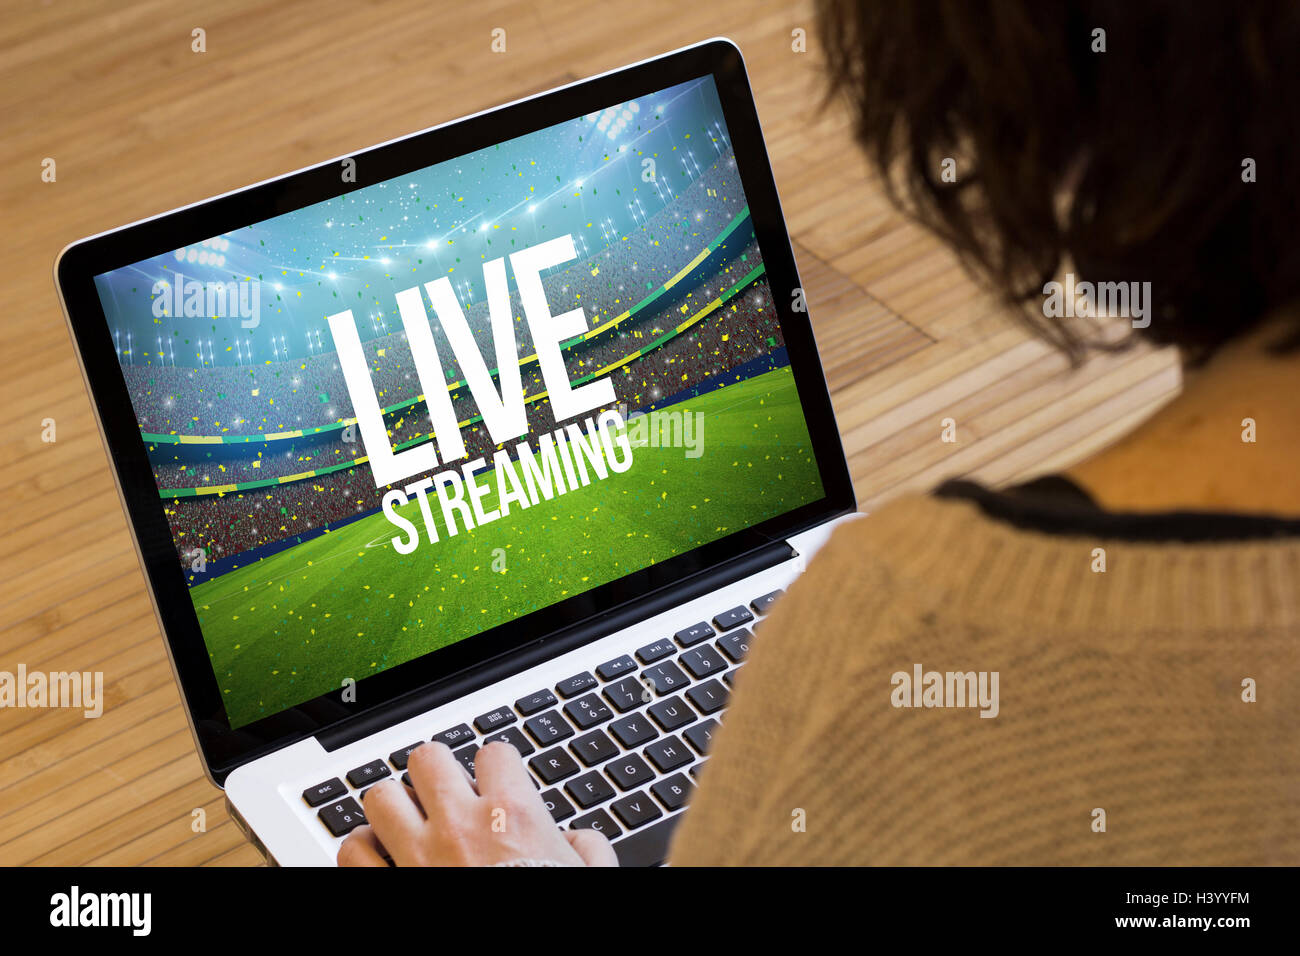 live streaming concept: live streaming text on a stadium on a laptop screen. Screen graphics are made up. Stock Photo